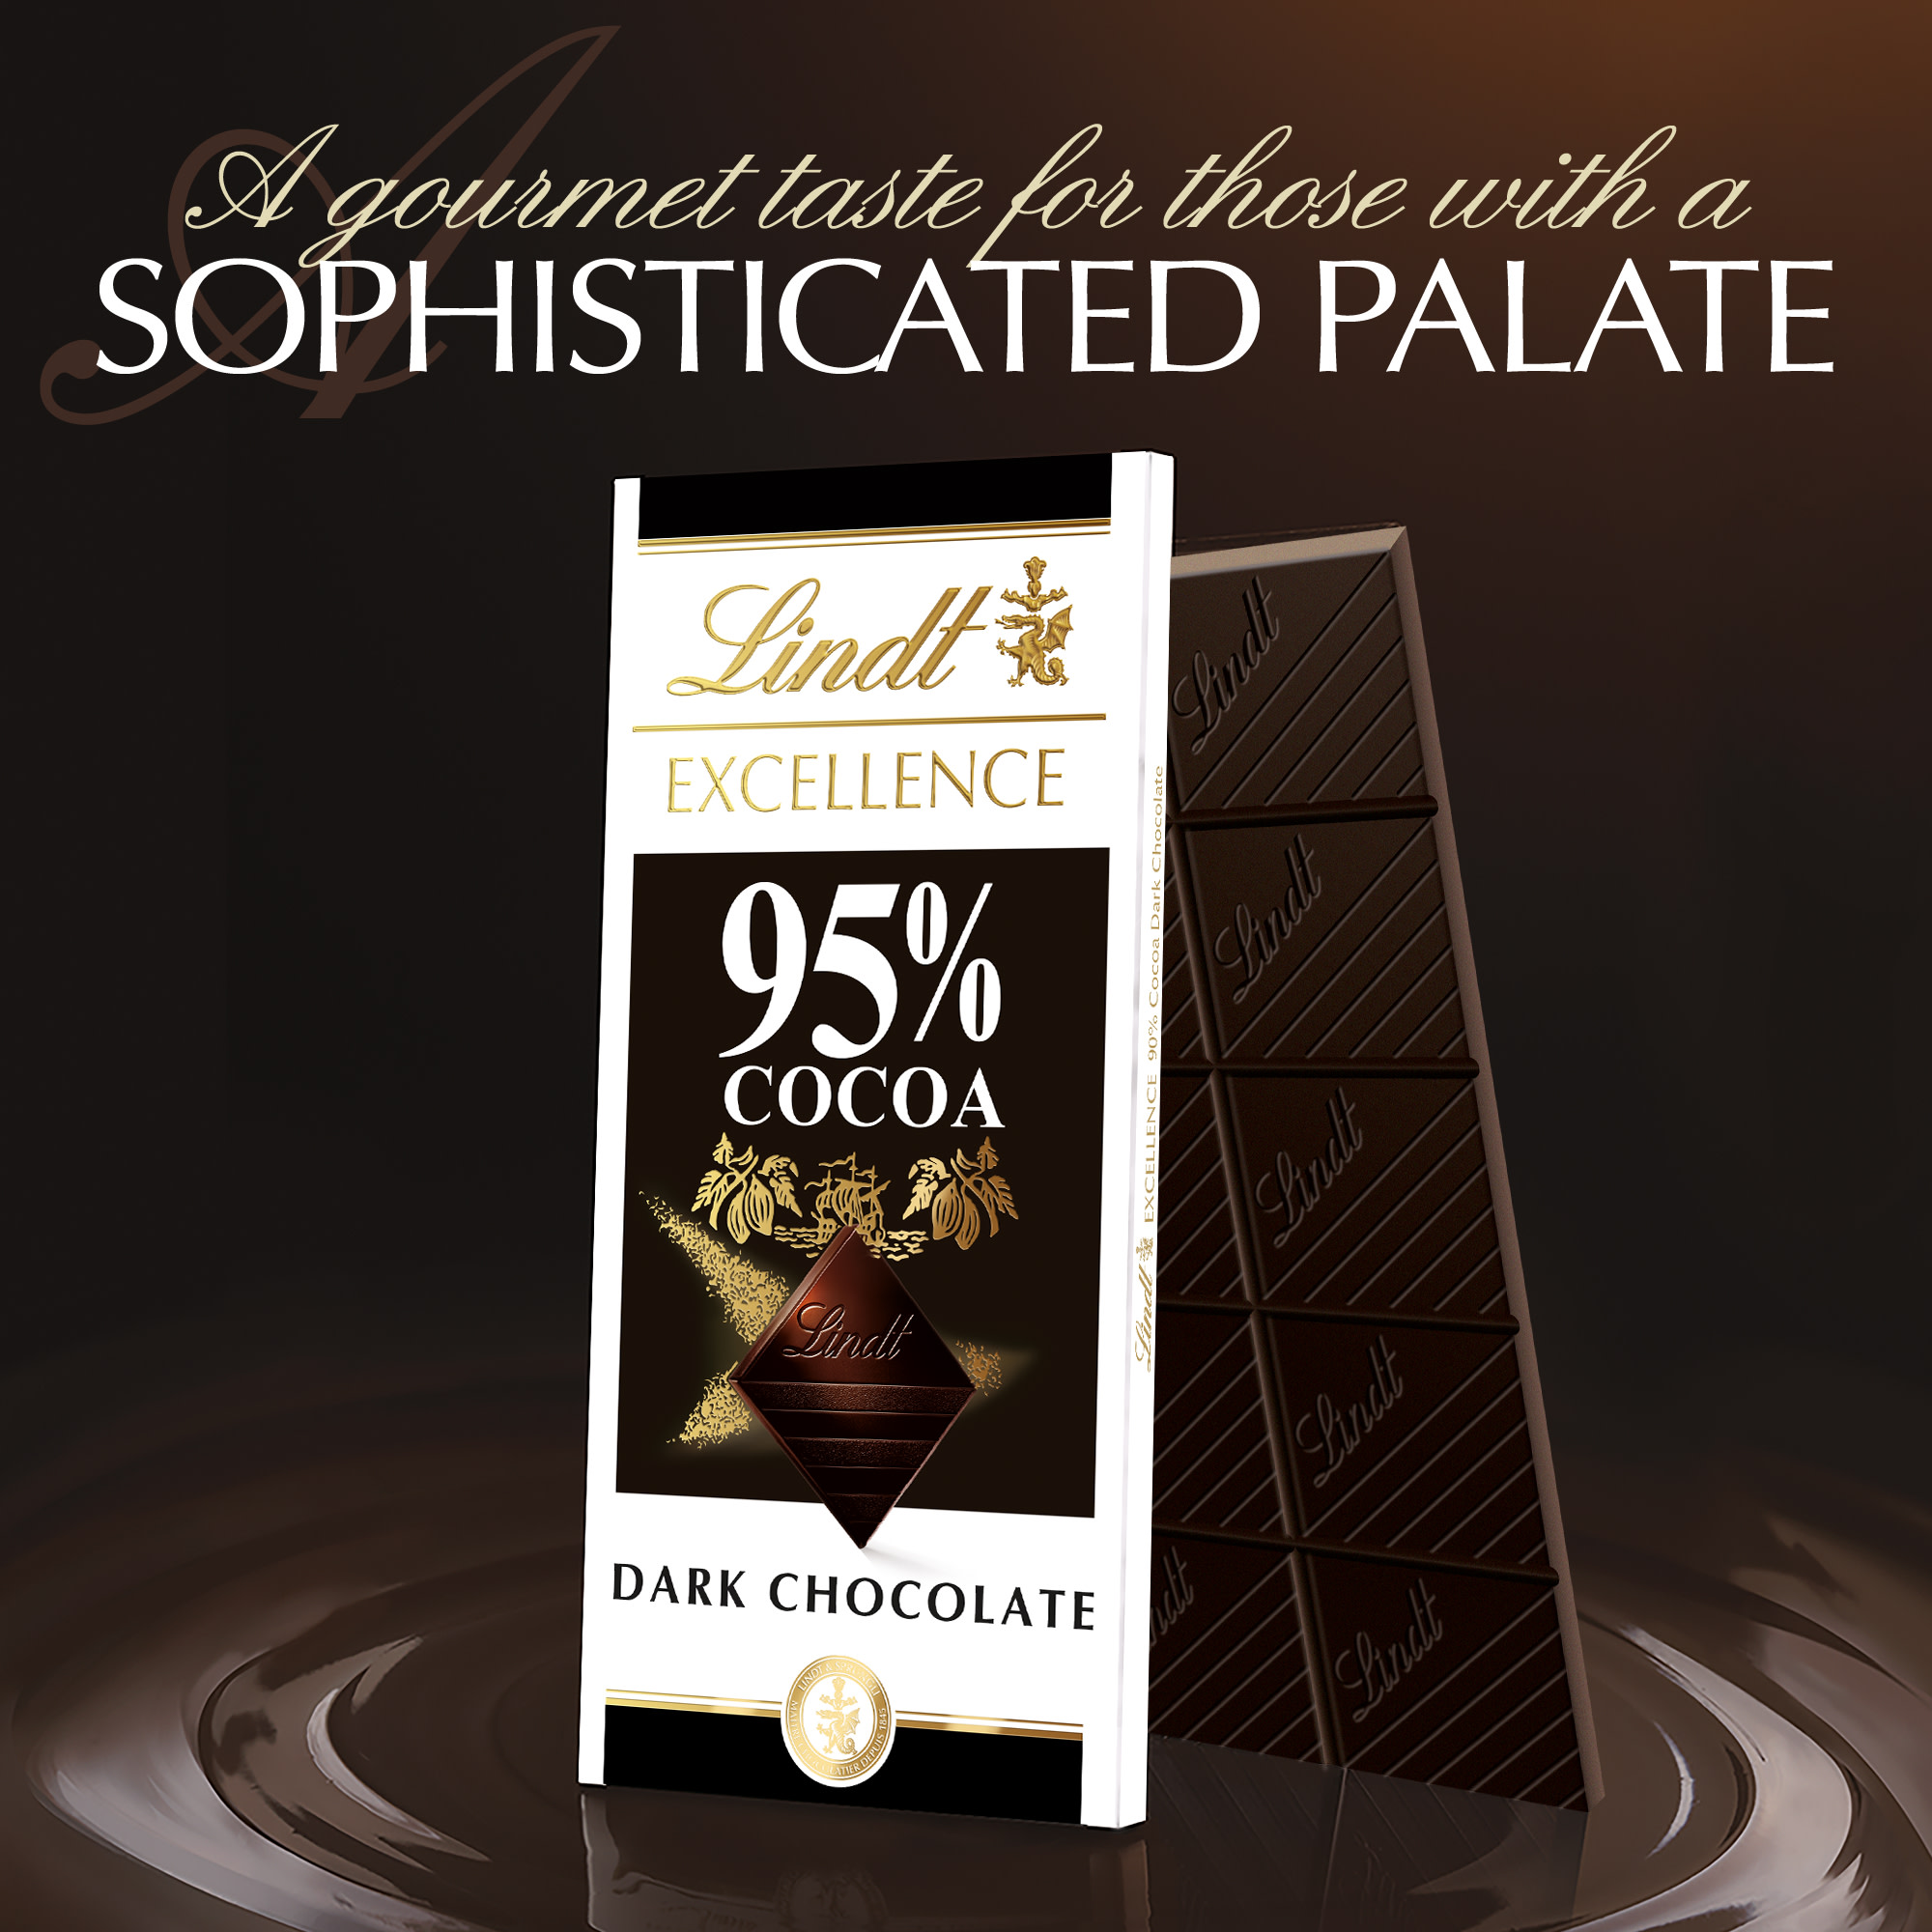 Lindt EXCELLENCE 95% Cocoa Dark Chocolate Candy Bar, 2.8 oz. Bar - image 5 of 16